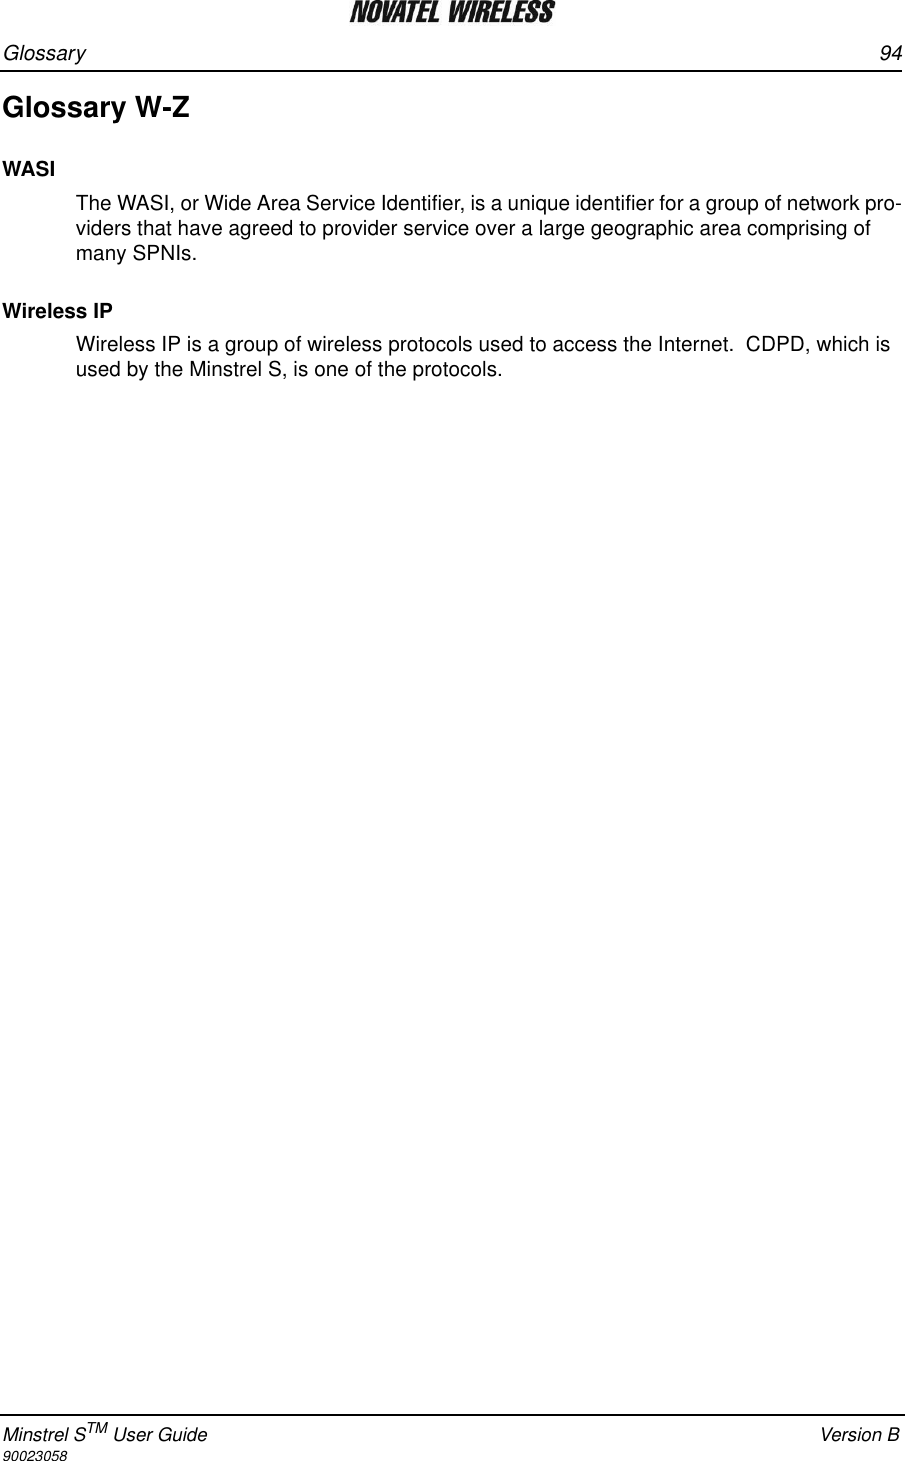 Glossary 94Minstrel STM User Guide Version B90023058Glossary W-ZWASIThe WASI, or Wide Area Service Identifier, is a unique identifier for a group of network pro-viders that have agreed to provider service over a large geographic area comprising of many SPNIs.Wireless IPWireless IP is a group of wireless protocols used to access the Internet.  CDPD, which is used by the Minstrel S, is one of the protocols.